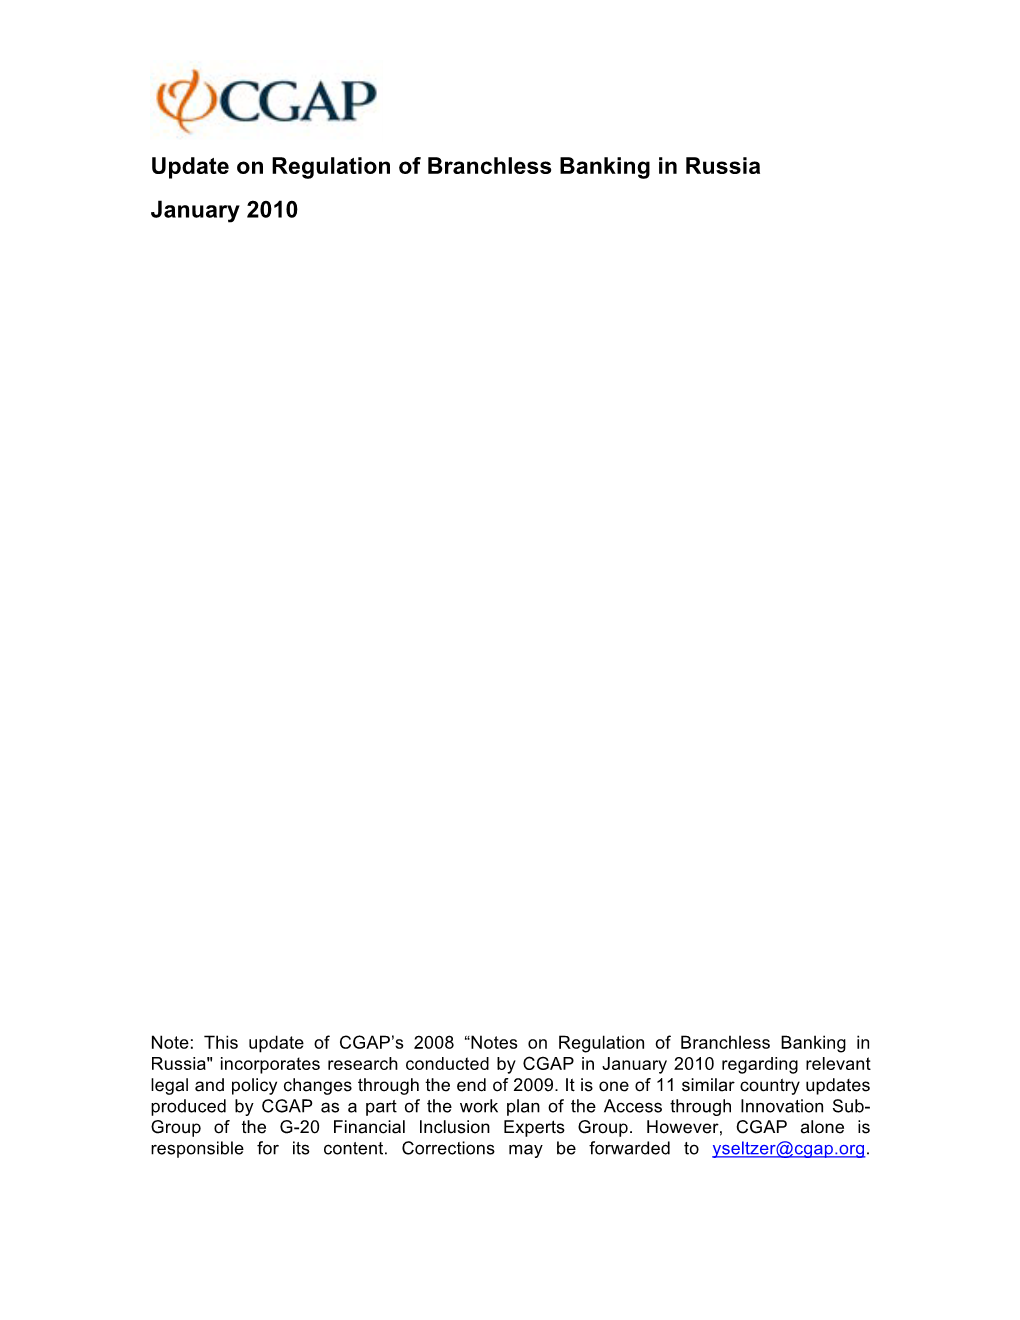 CGAP Regulation of Branchless Banking in Russia